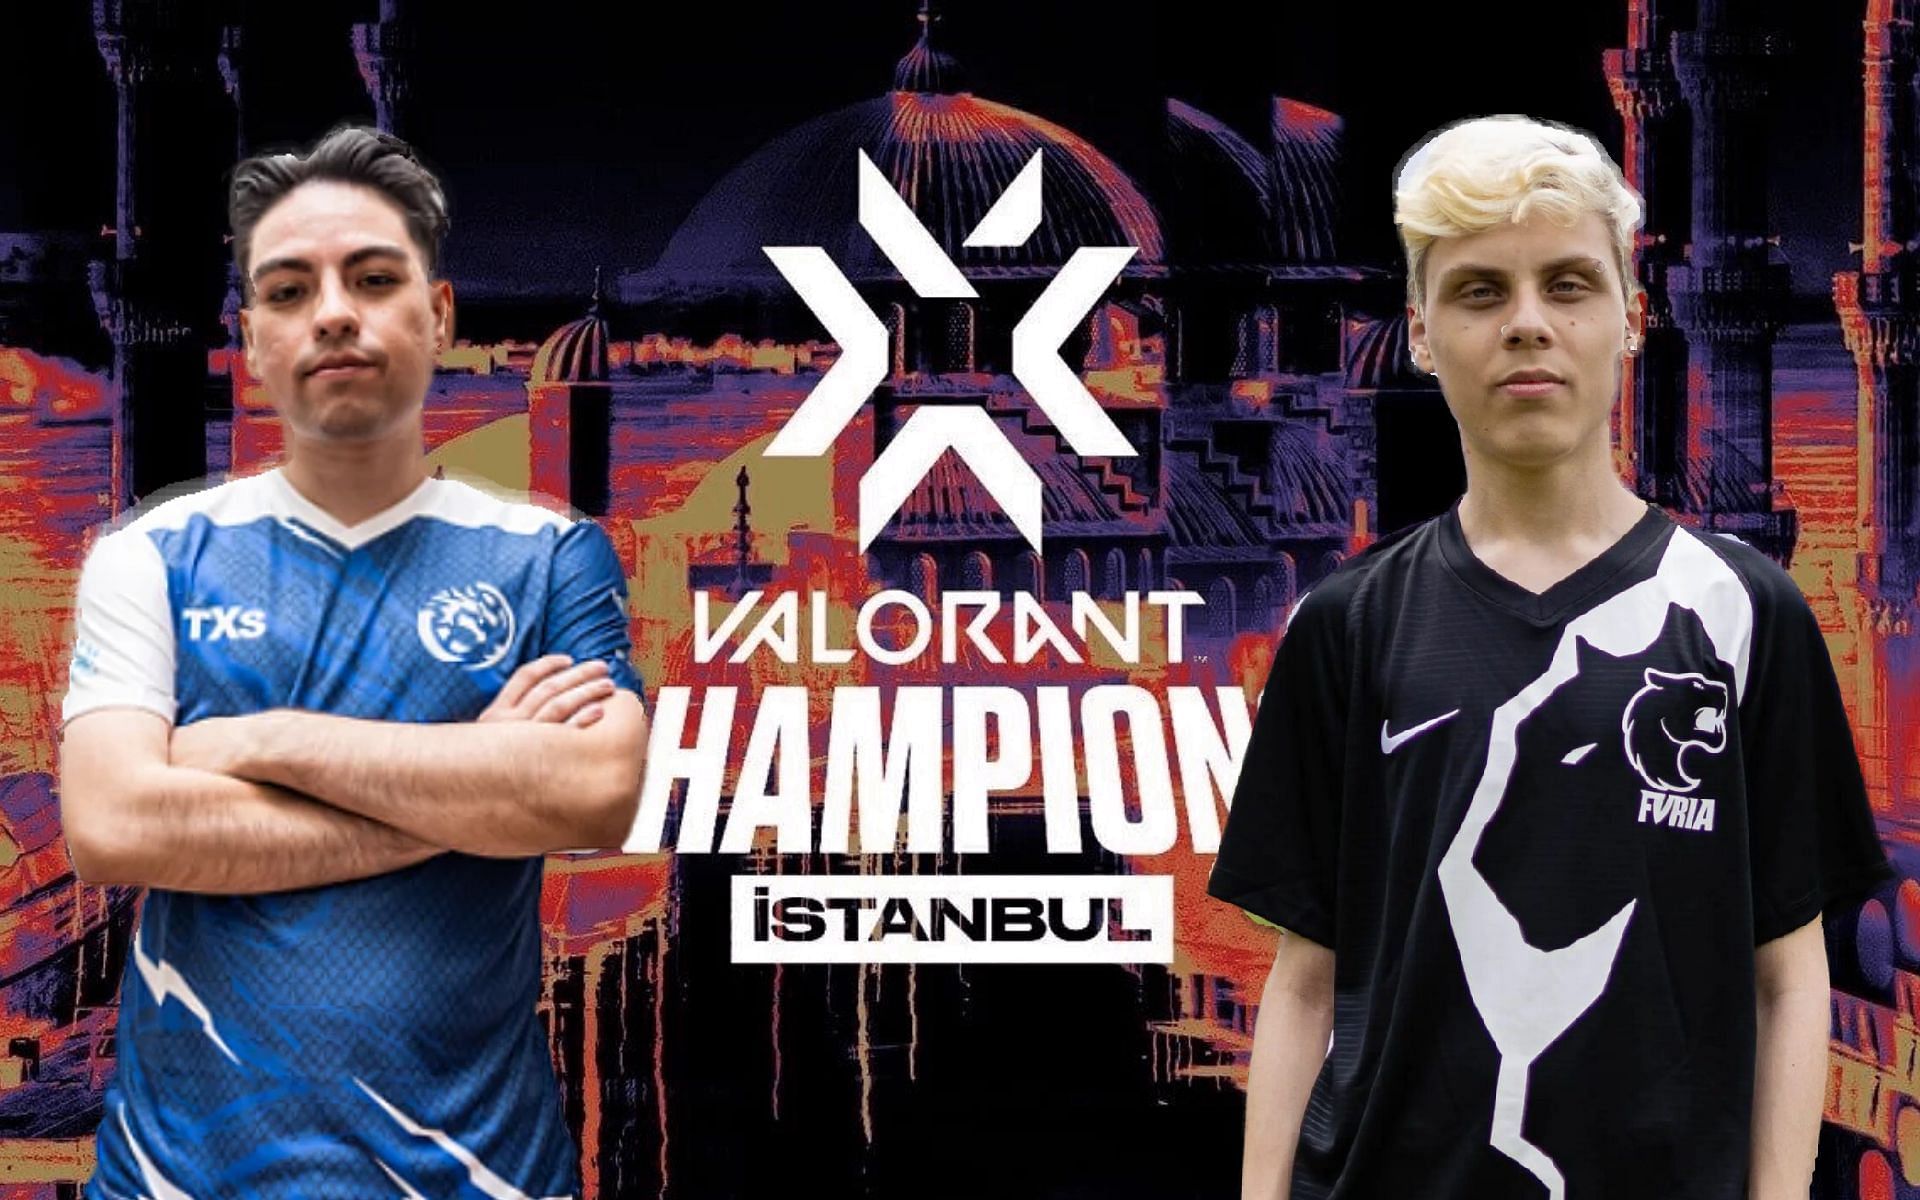 Top 5 underdog teams to look out for in the upcoming Valorant Champions 2022 Istanbul (Image via Sportskeeda)